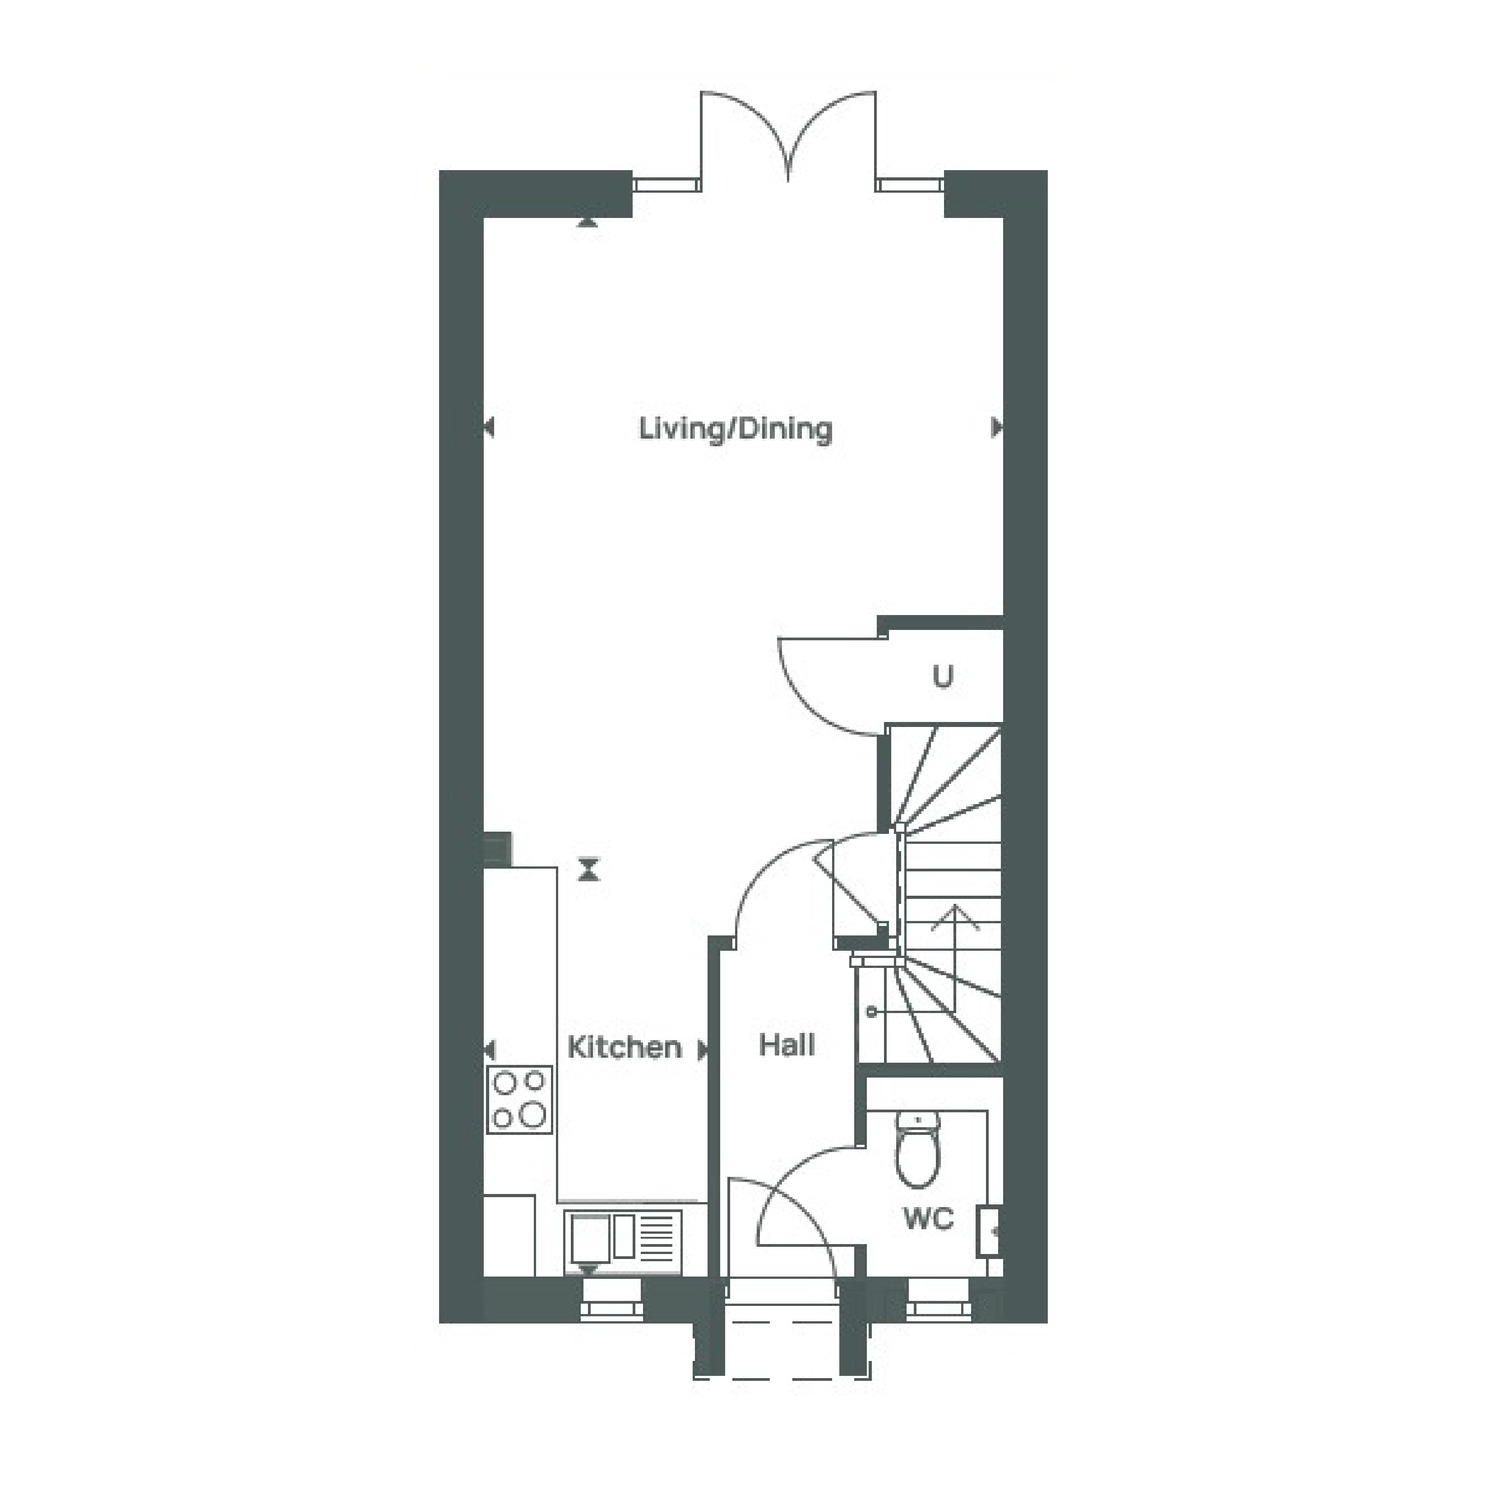 Coopers Hill 2 bed house variation Plot 13,15,17,26,28,29,31,33,14,16,18,27,30,32 ground floor-01-01